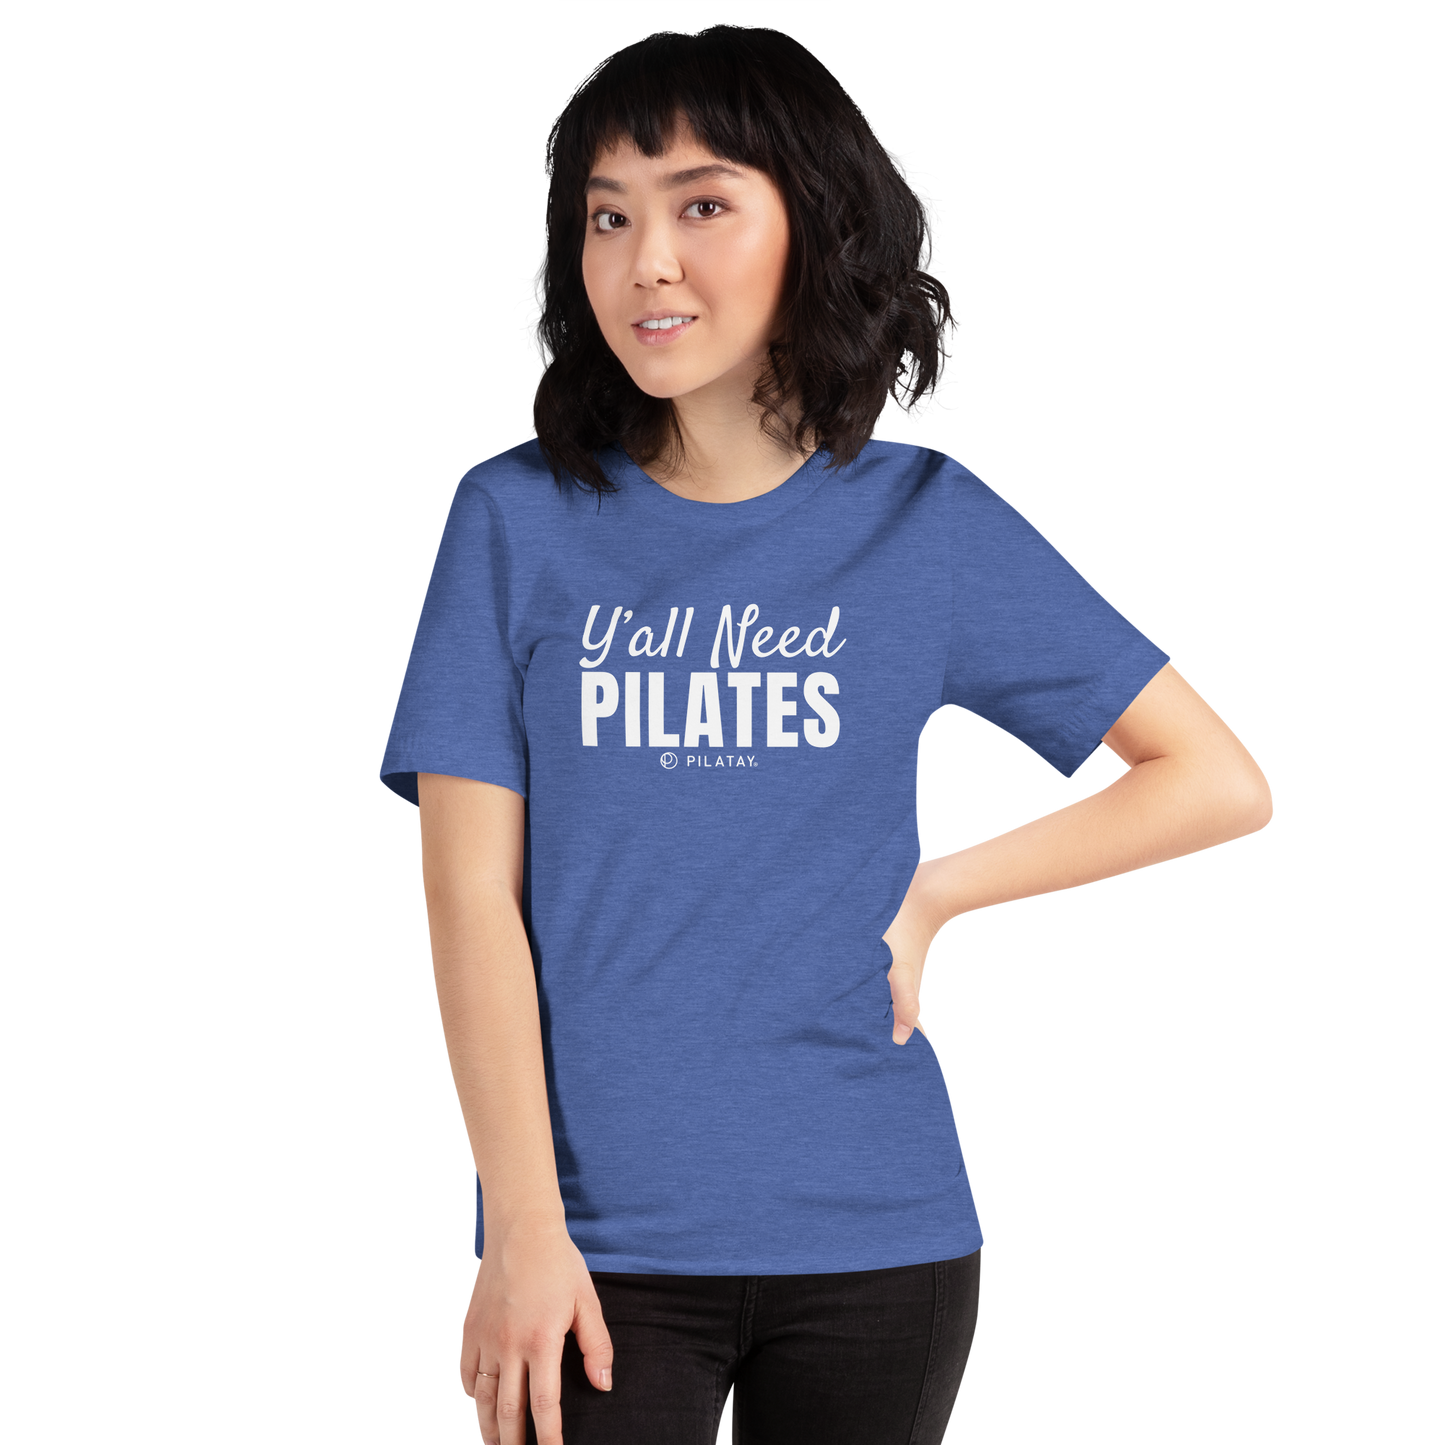 funny pilates shirt reading y'all need pilates in white writing - funny pilates tshirt also available in pink and grey